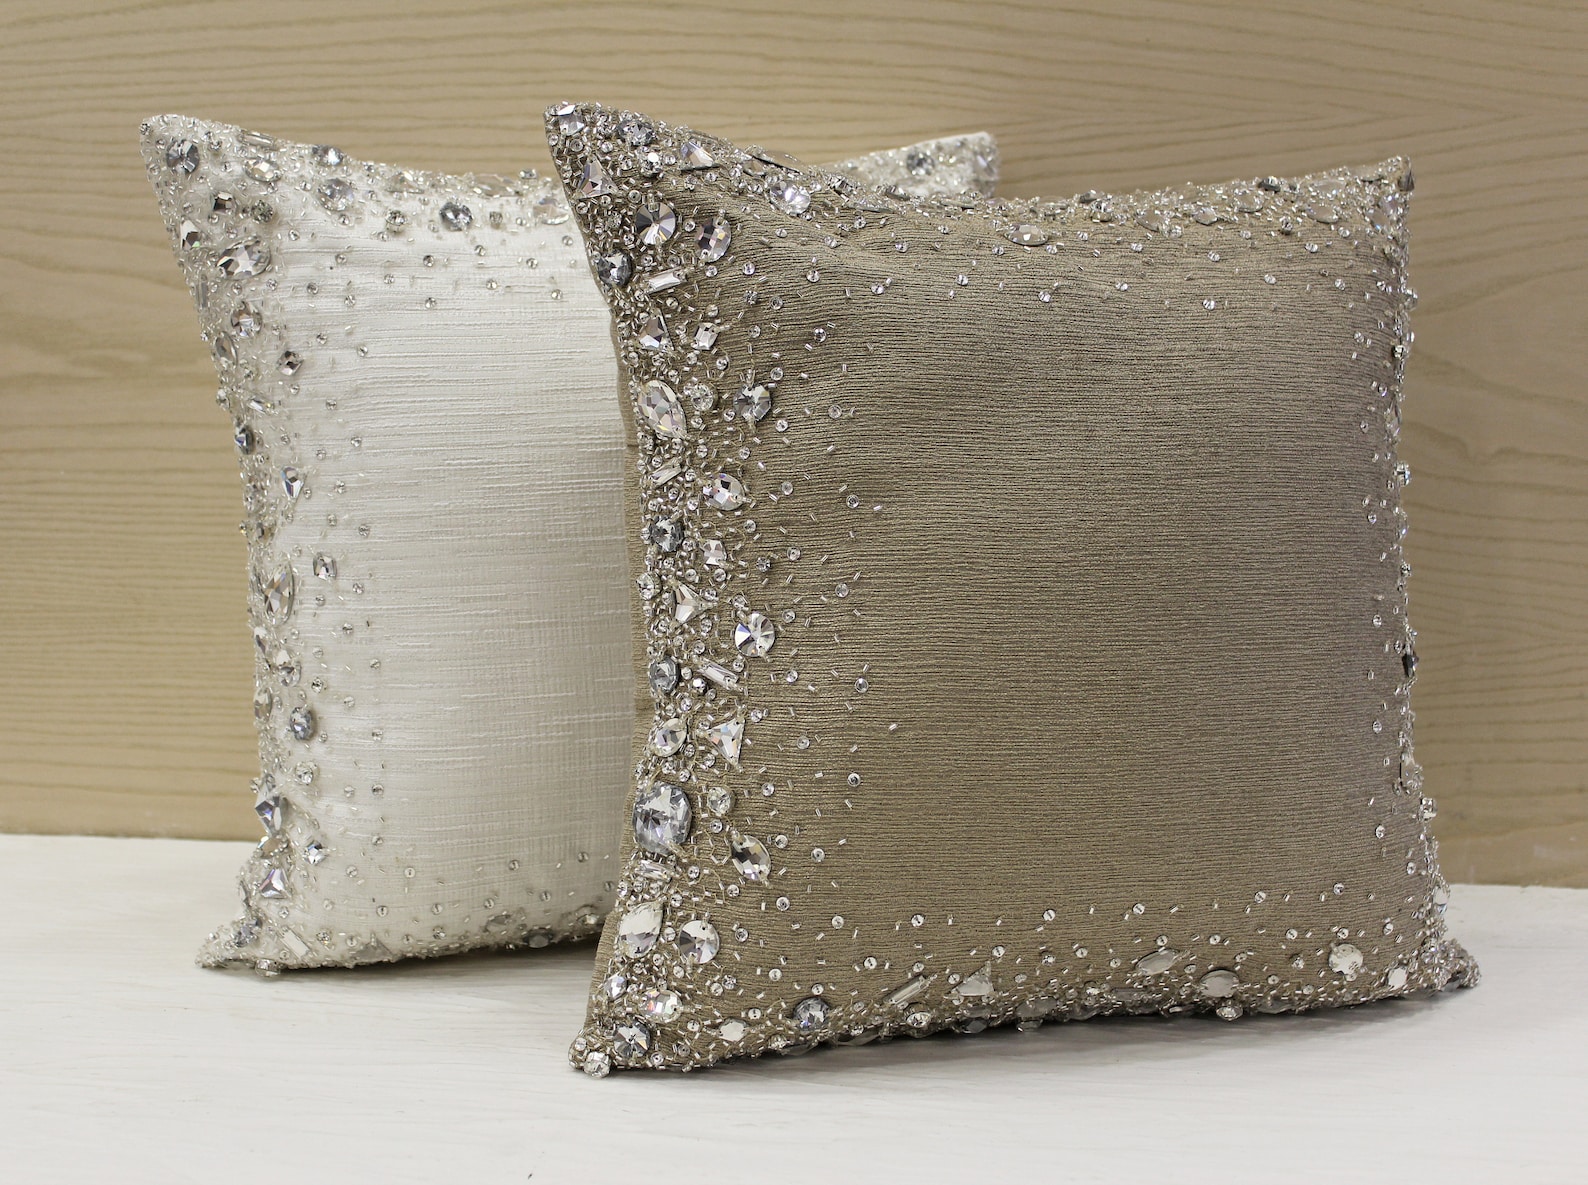 White Bling Crystal Throw Pillow Cover Luxury Contemporary | Etsy